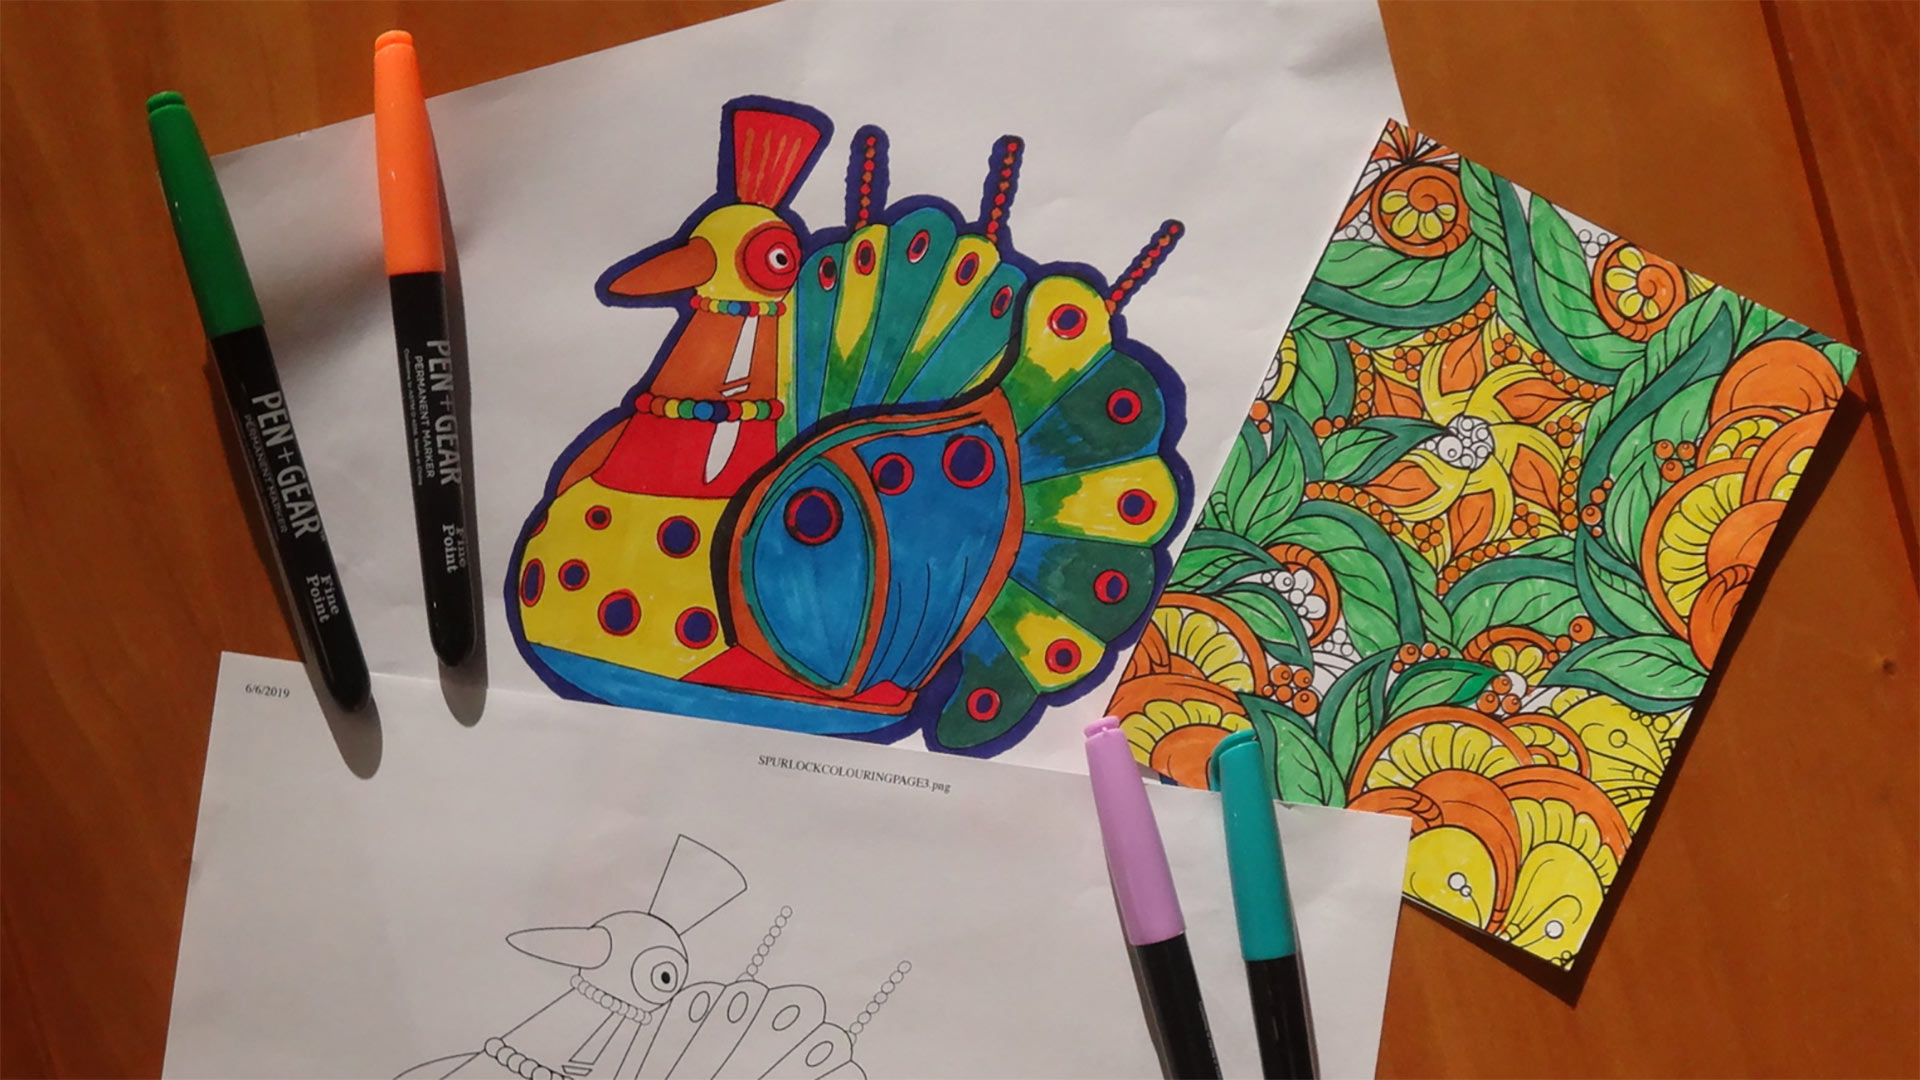 partially colored coloring sheets with a peacock and geometric design alongside 4 colored markers